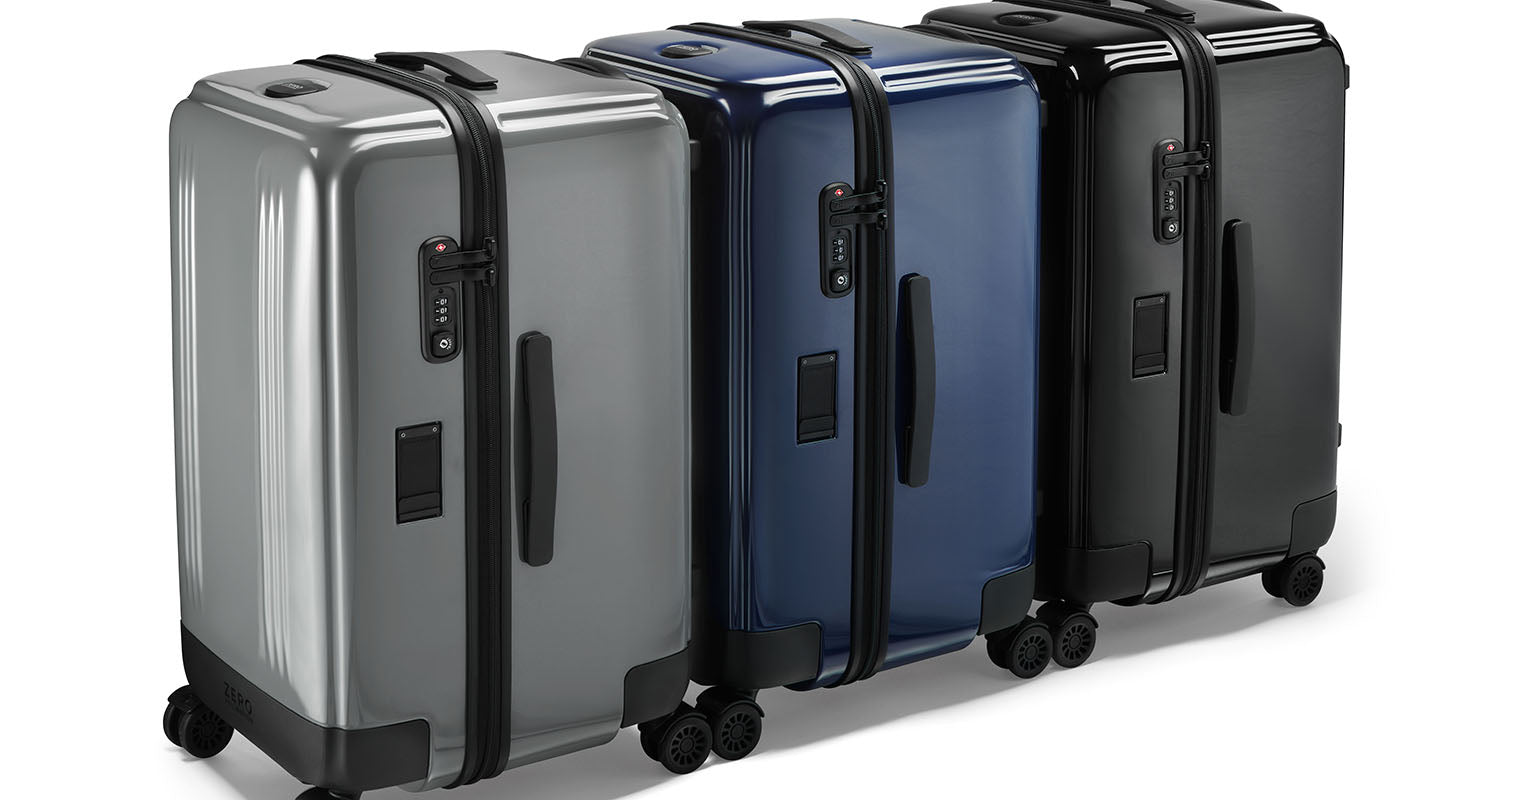 Zero Halliburton Introduces New Compact Trunk to Its Renowned Collection of Travel Cases